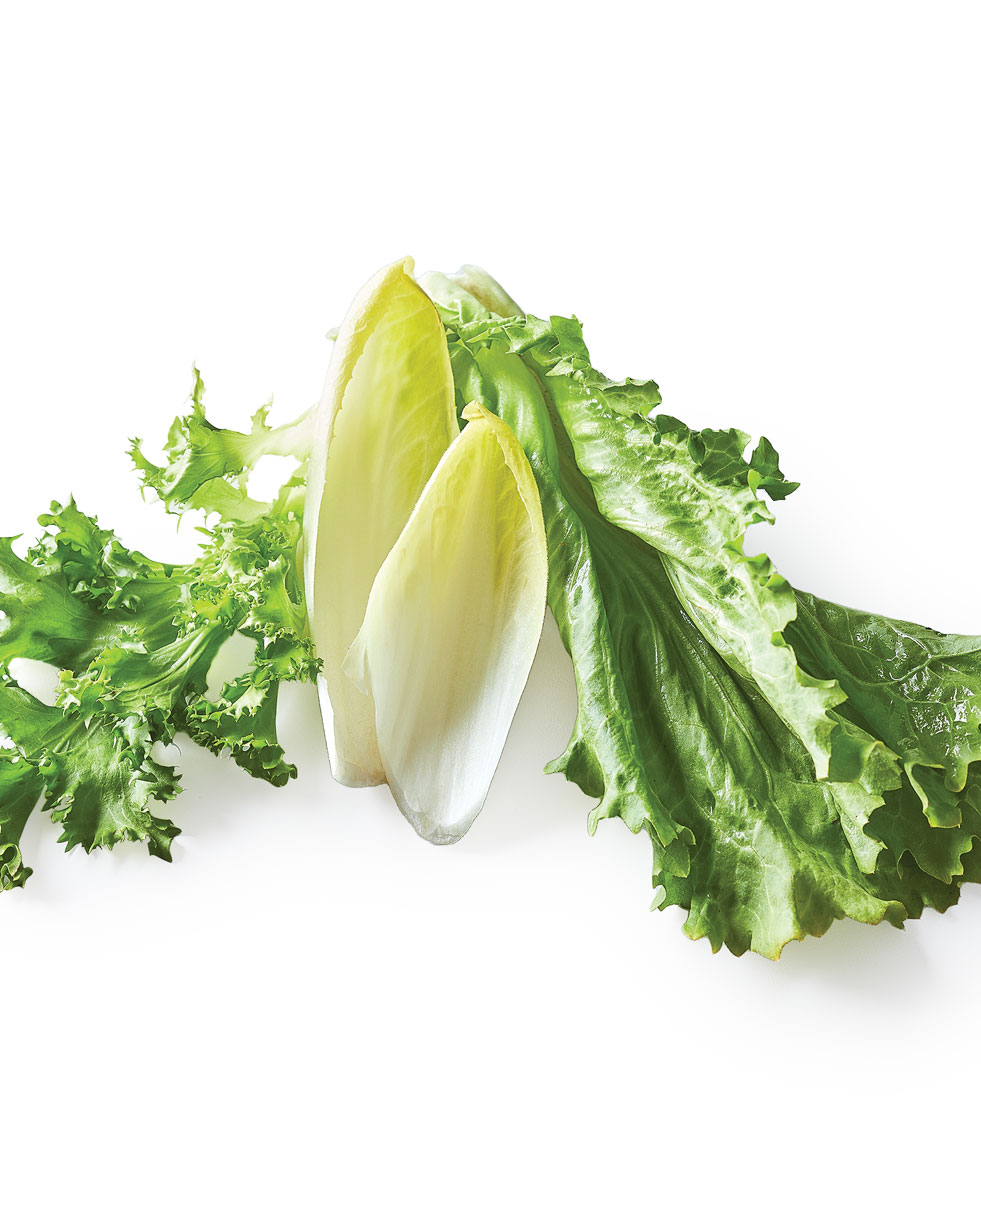 Are there different types of endive?